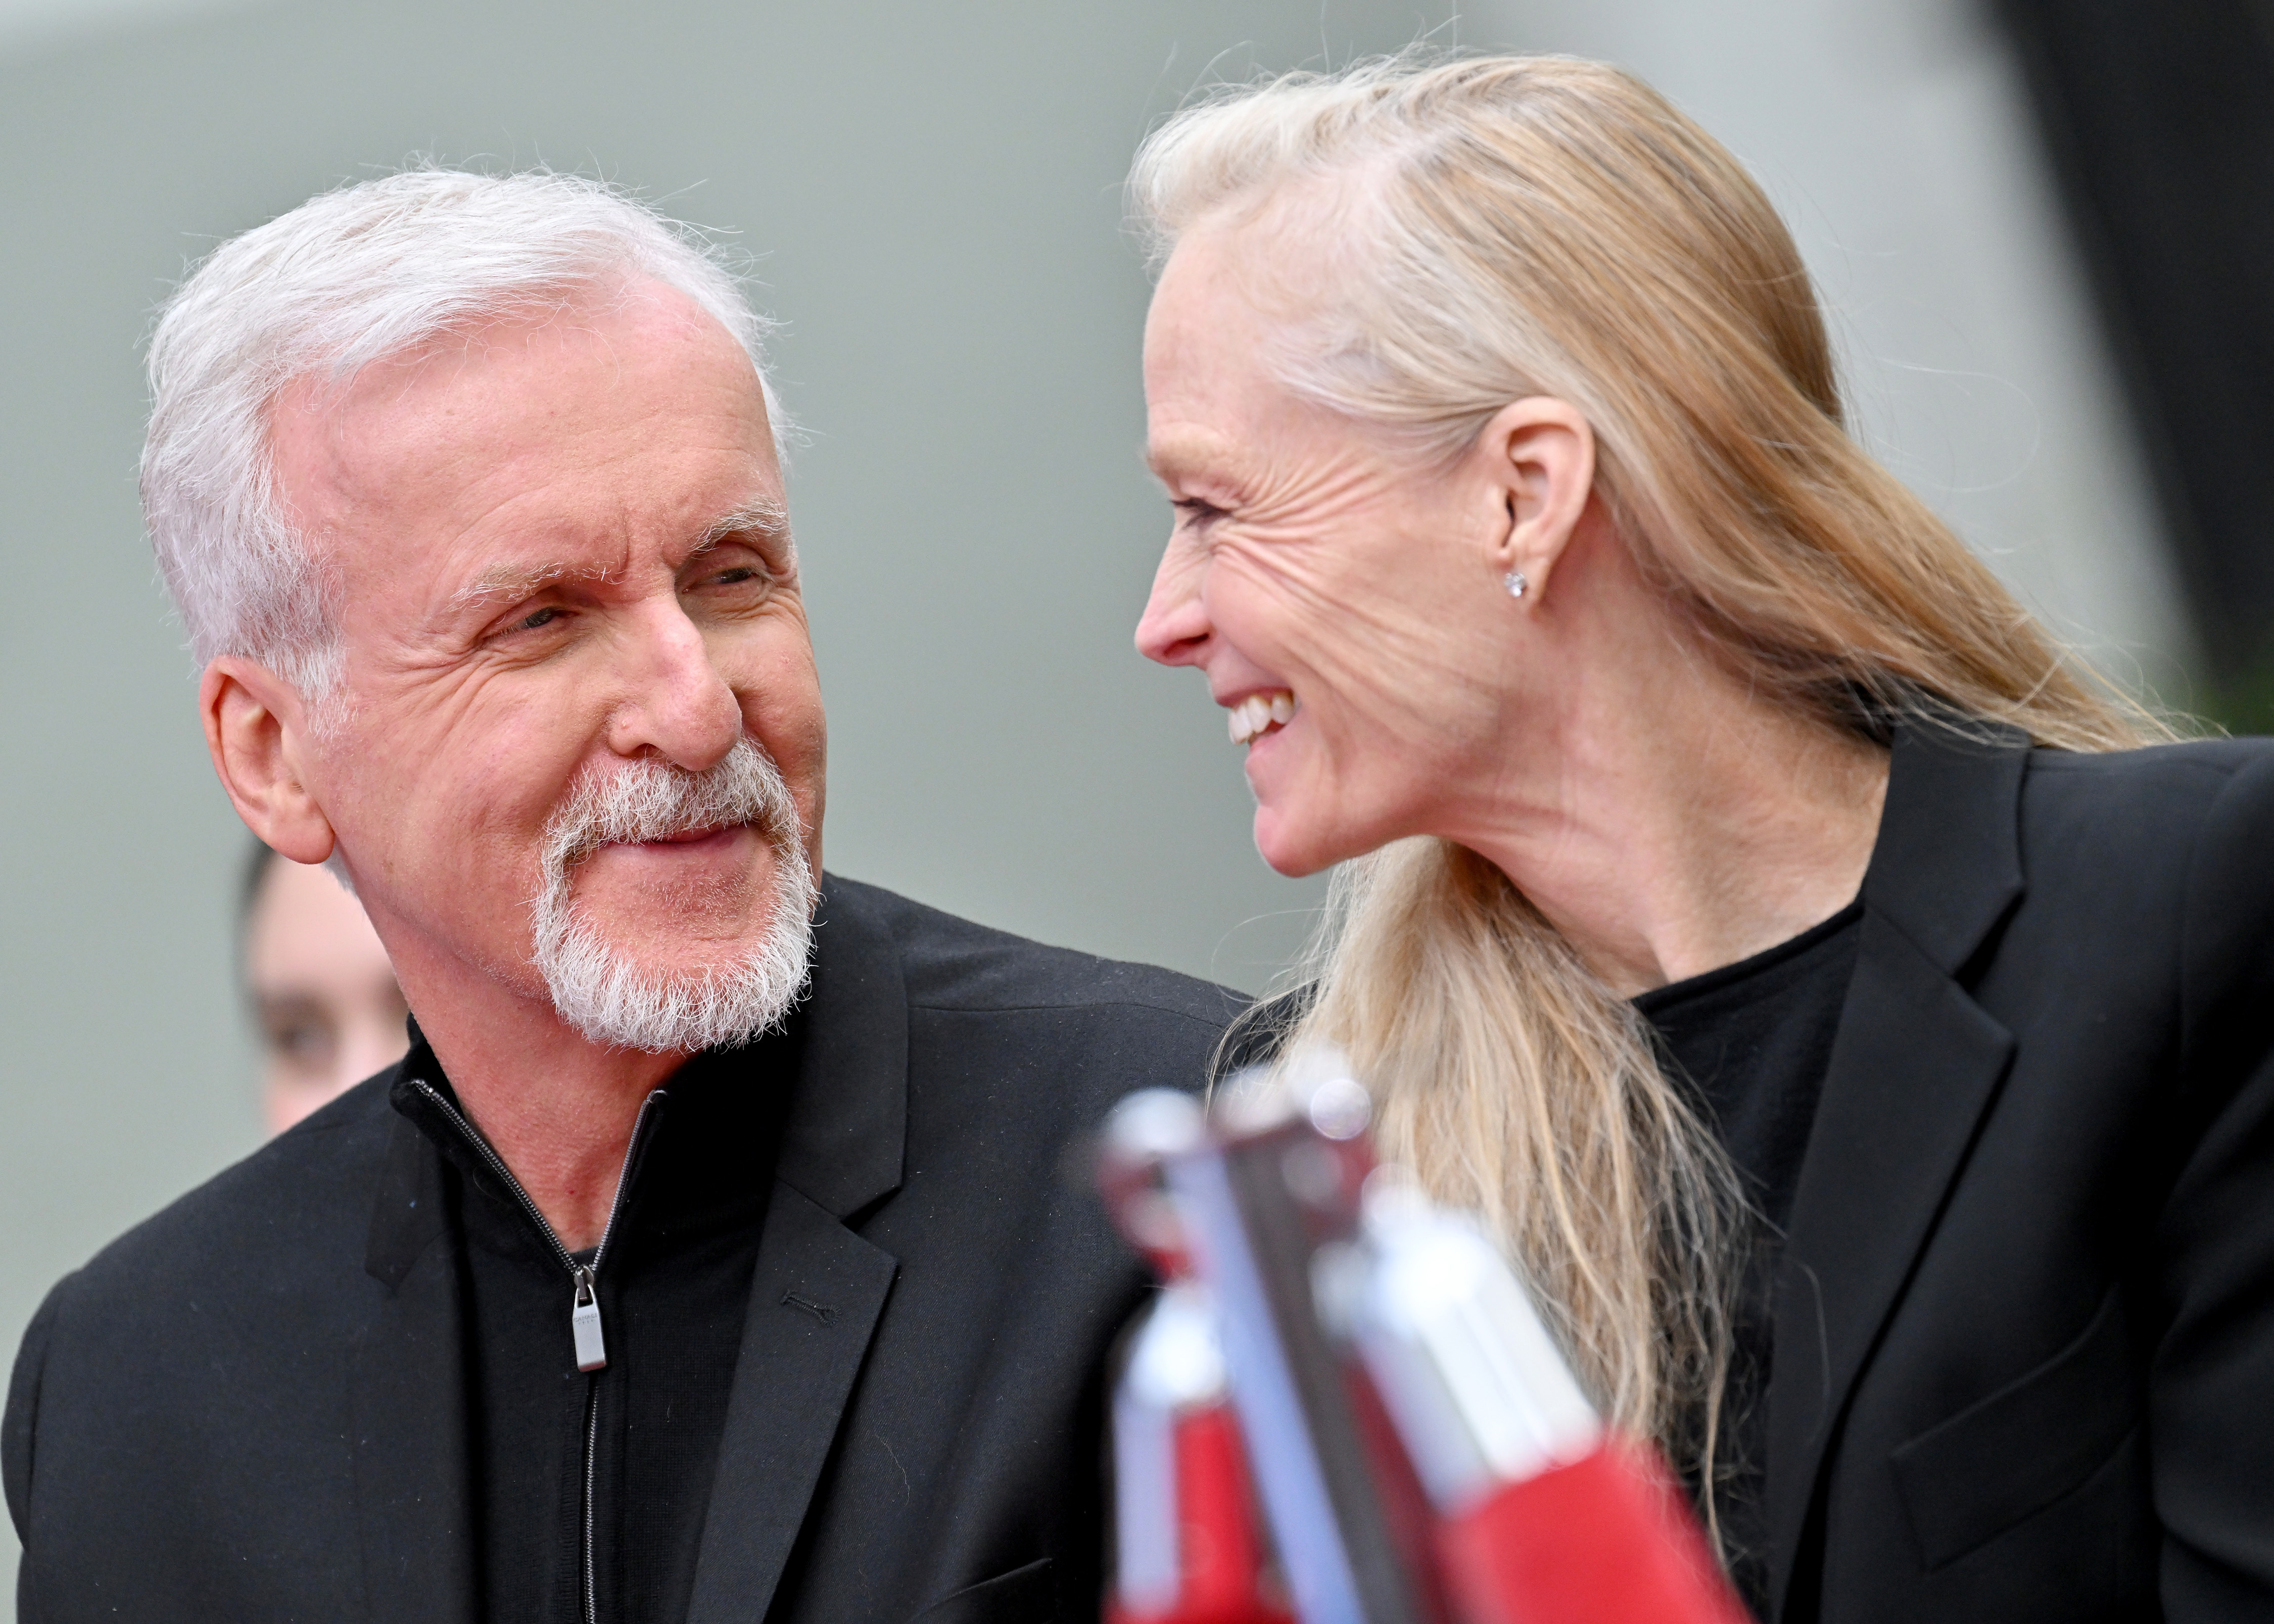 James Cameron und Suzy Amis Cameron im TCL Chinese Theatre am 12. Januar 2023 in Hollywood, Kalifornien | Quelle: Getty Images